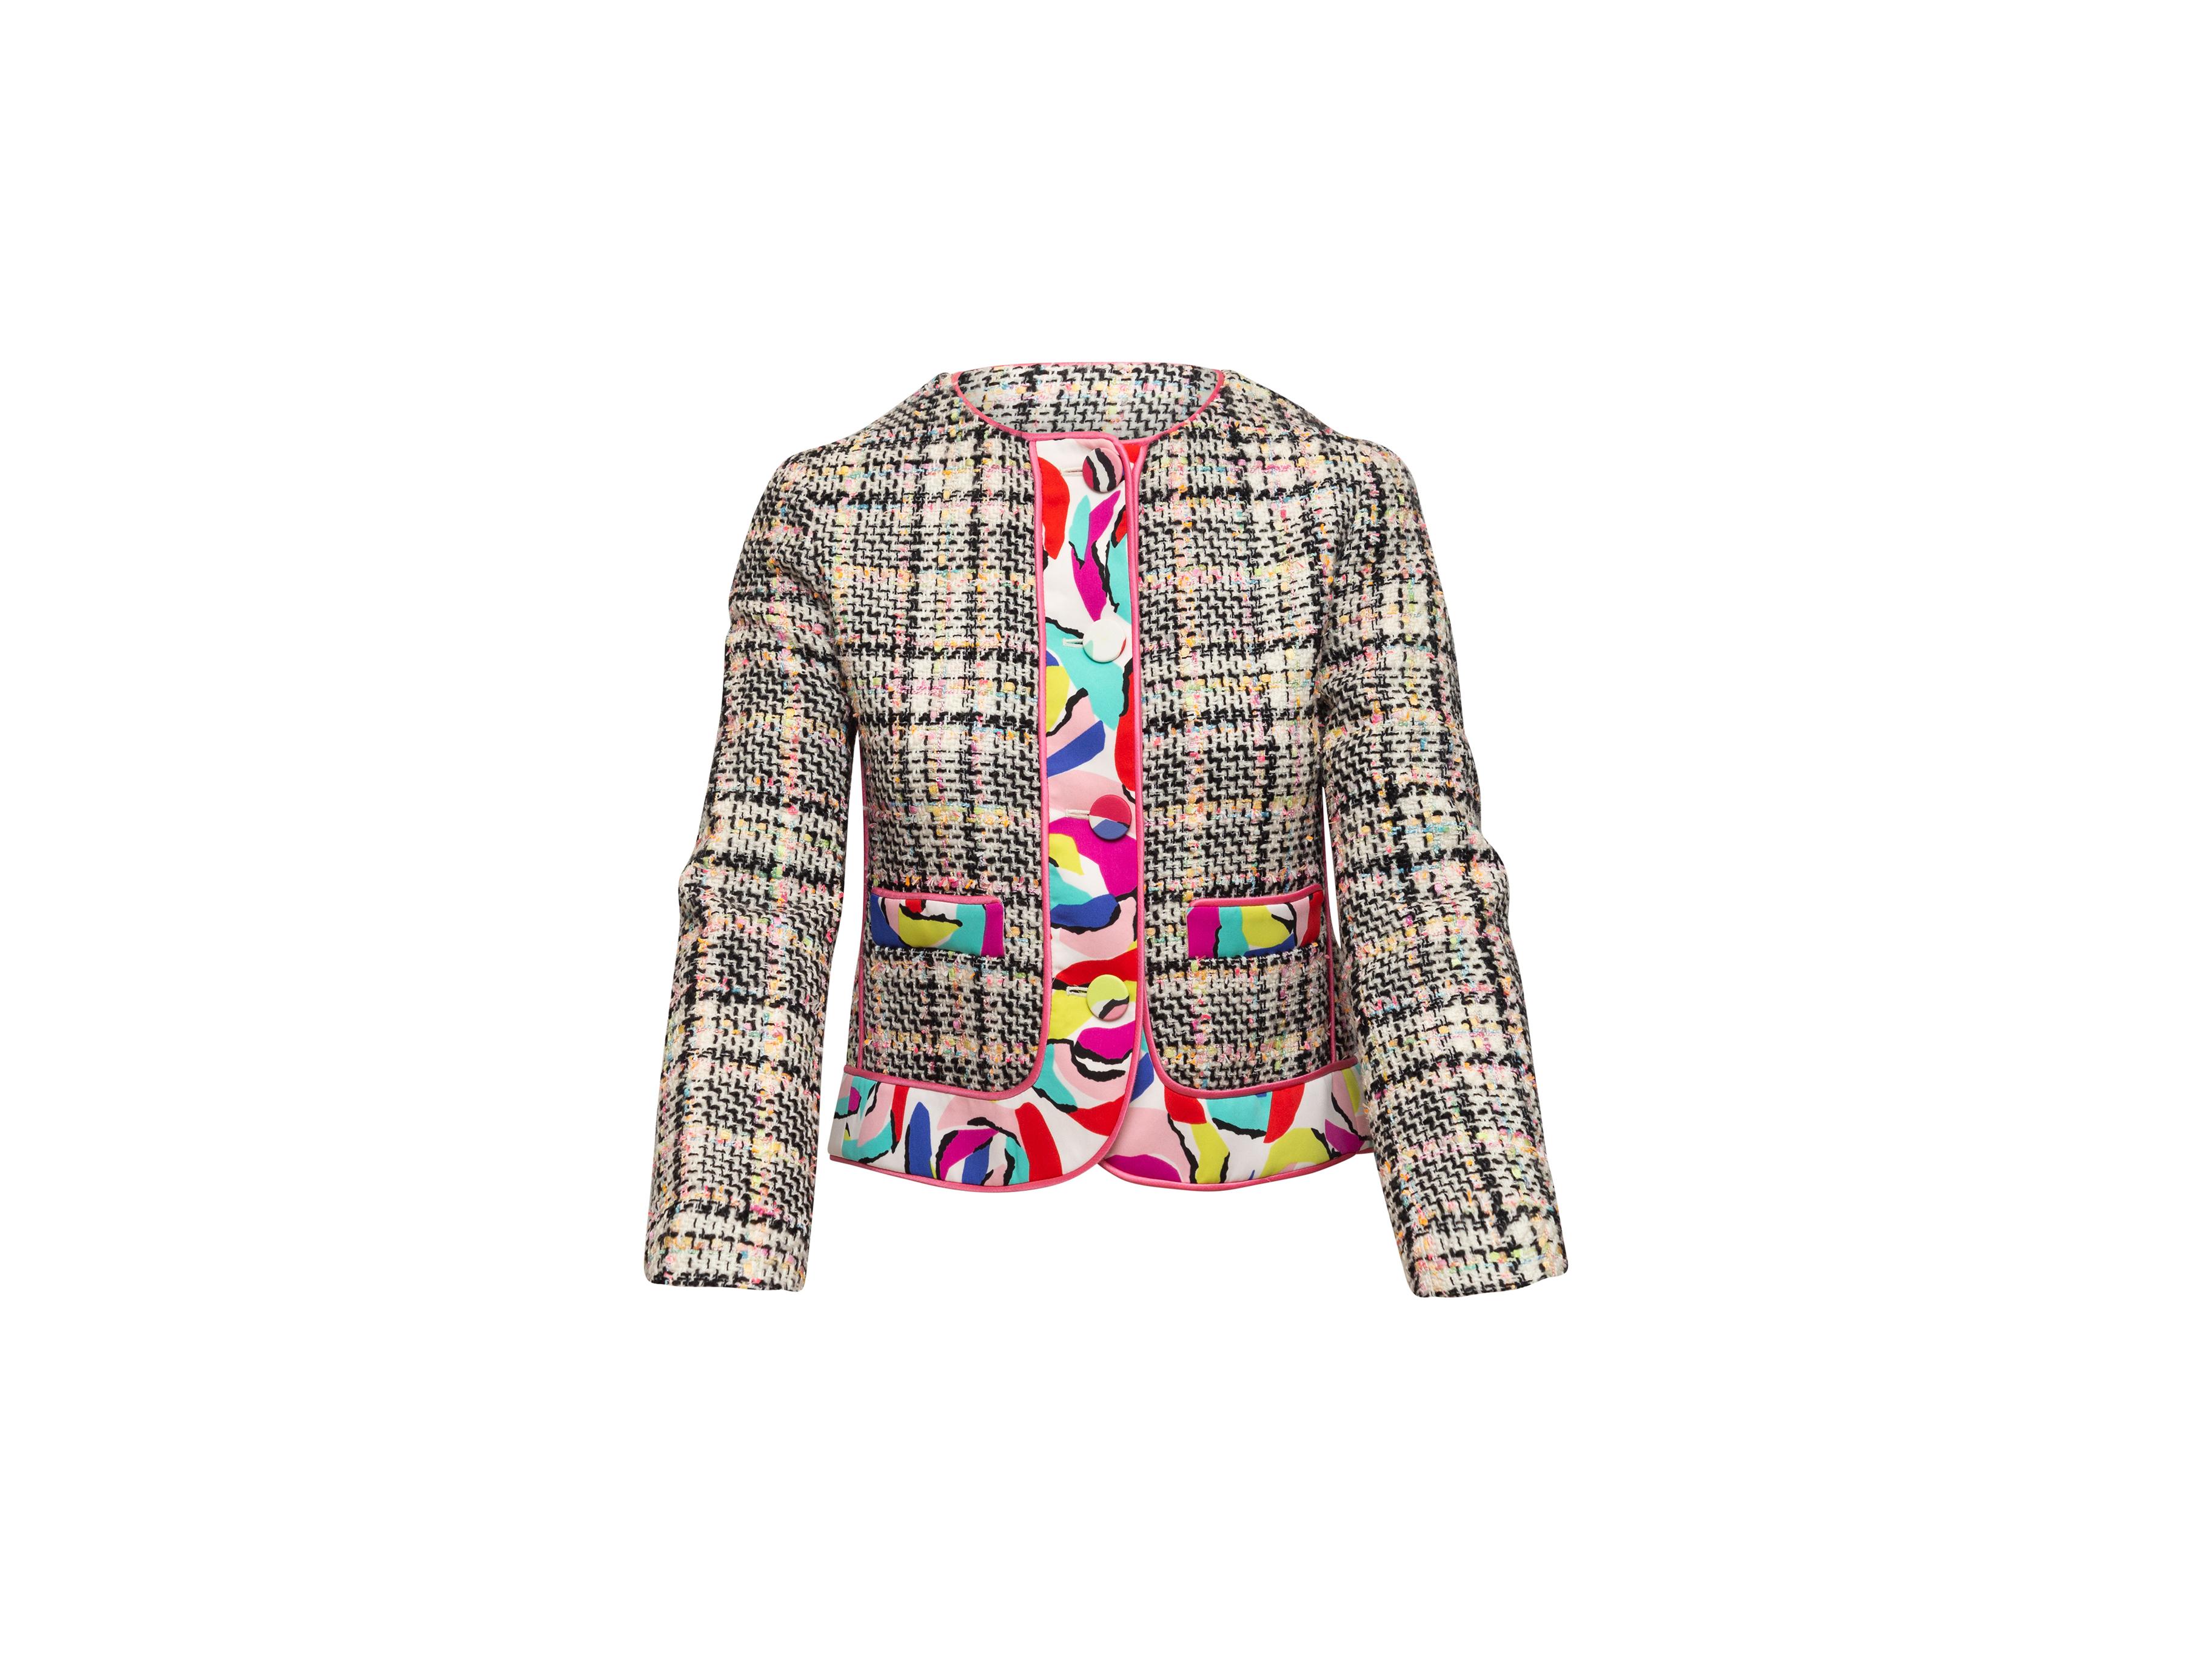 Product details: Vintage white and multicolor virgin wool tweed jacket by Boutique Moschino. Multicolor printed trim throughout. Crew neck. Dual hip pockets. Button closures at center front. Designer size 36. 33